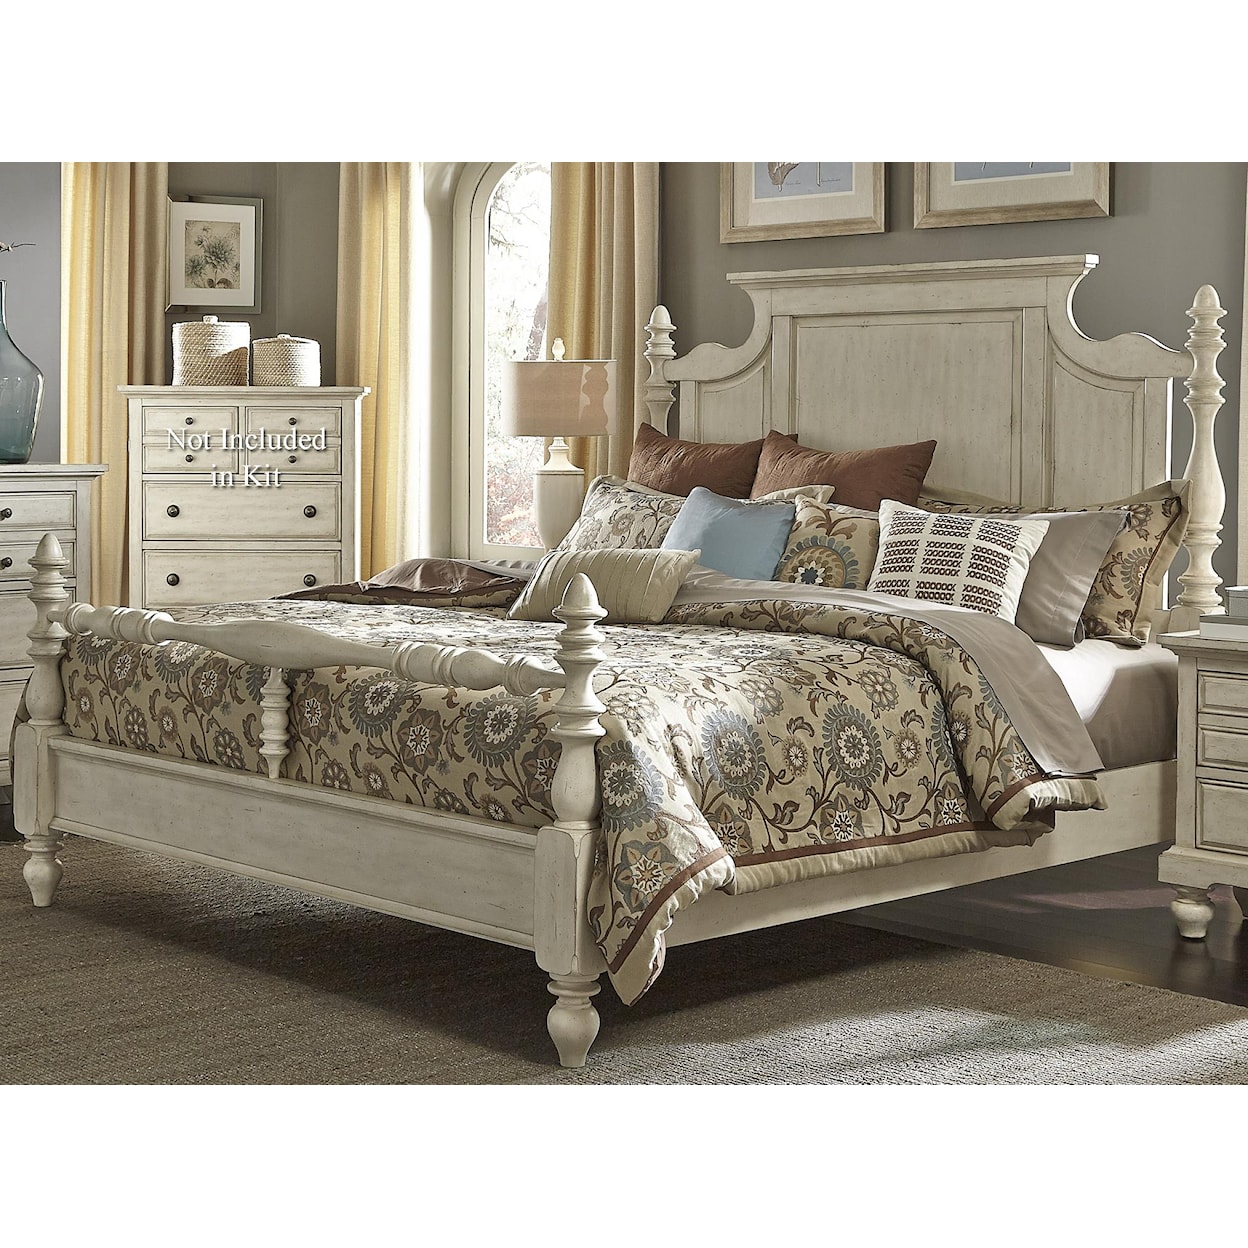 Liberty Furniture High Country 797 Queen Poster Bed